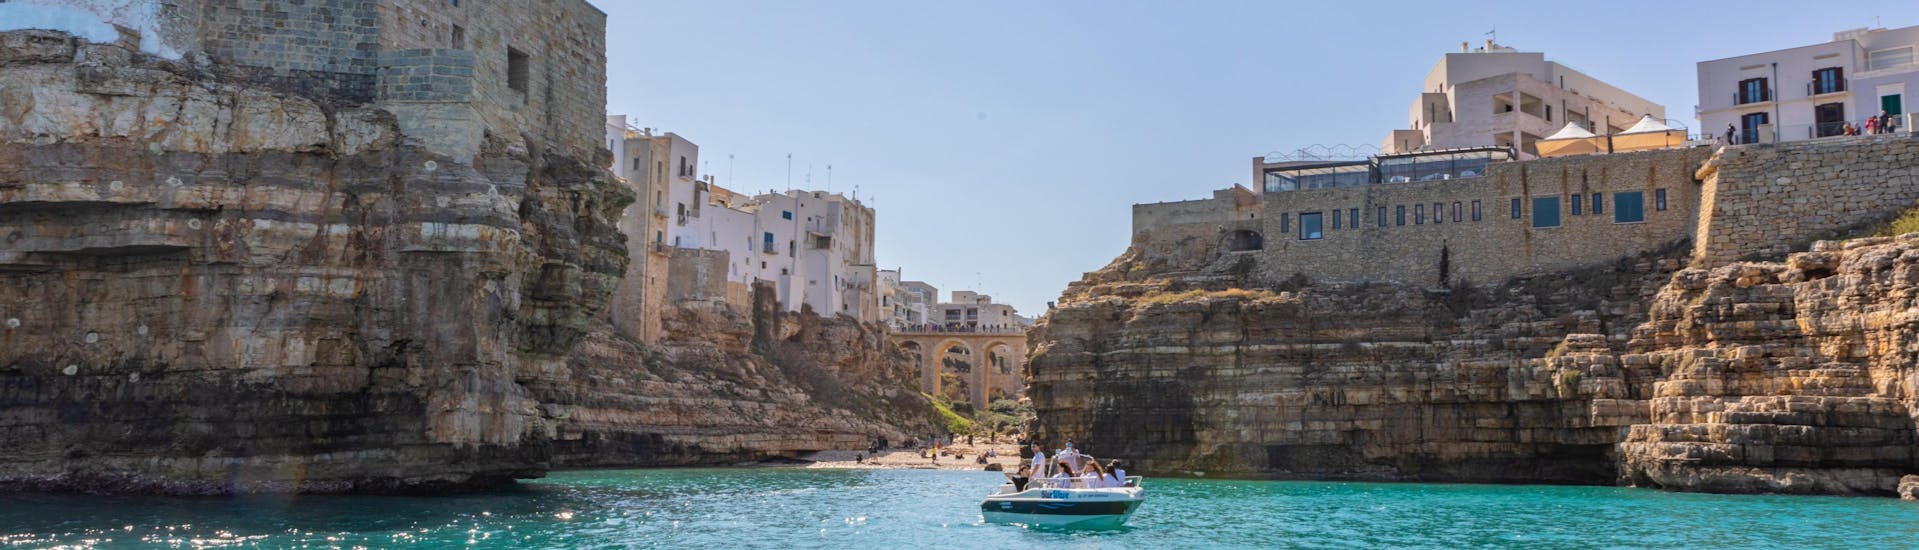 Private Boat Trip from Monopoli to the caves of Polignano a Mare with Apéritif from Blue Wave Polignano.